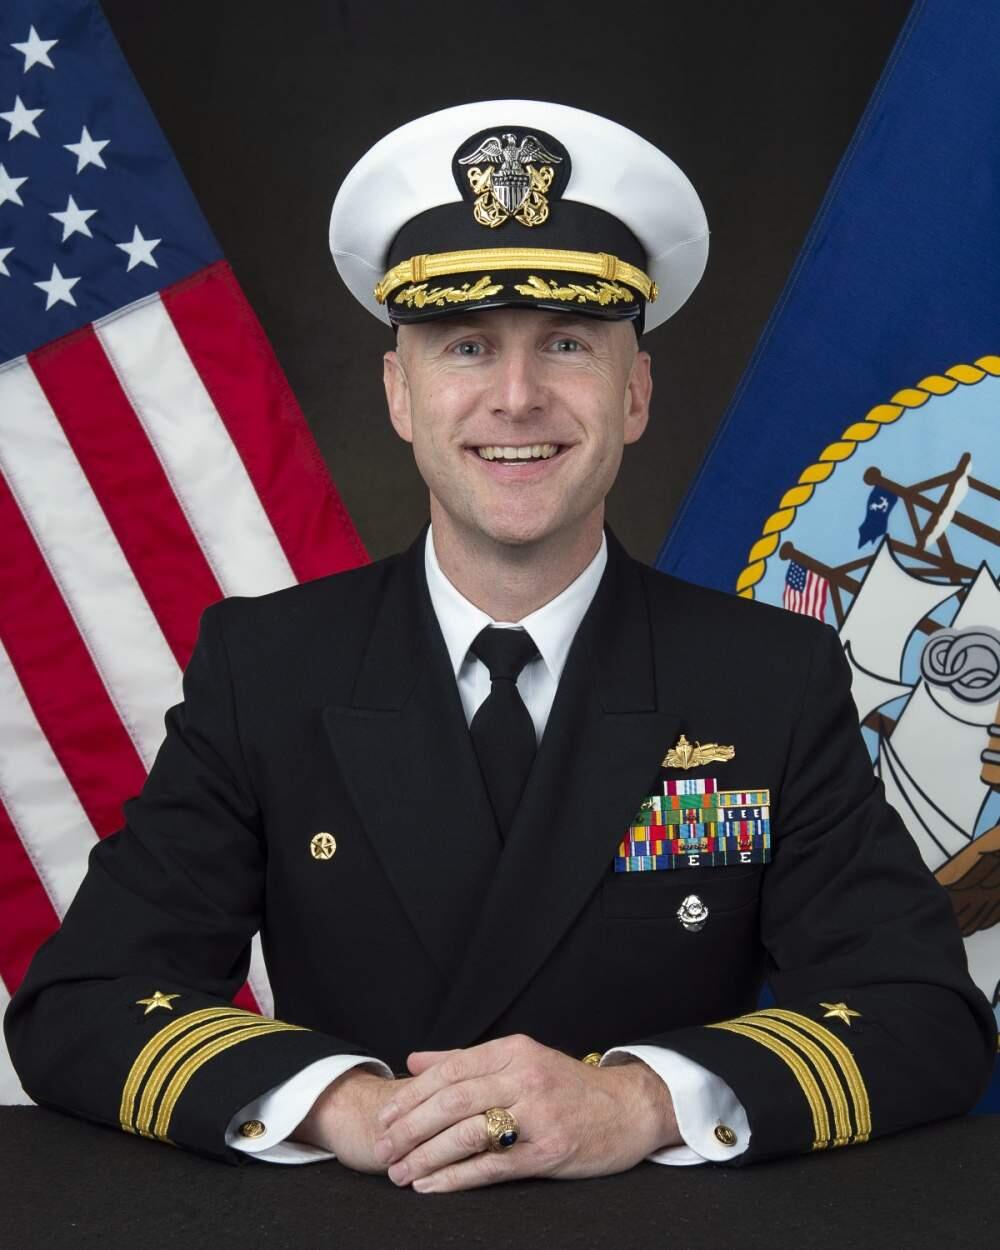 James Hoey of Santa Rosa is settling in as captain of a new combat ship, the USS Charleston. (U.S. Navy)